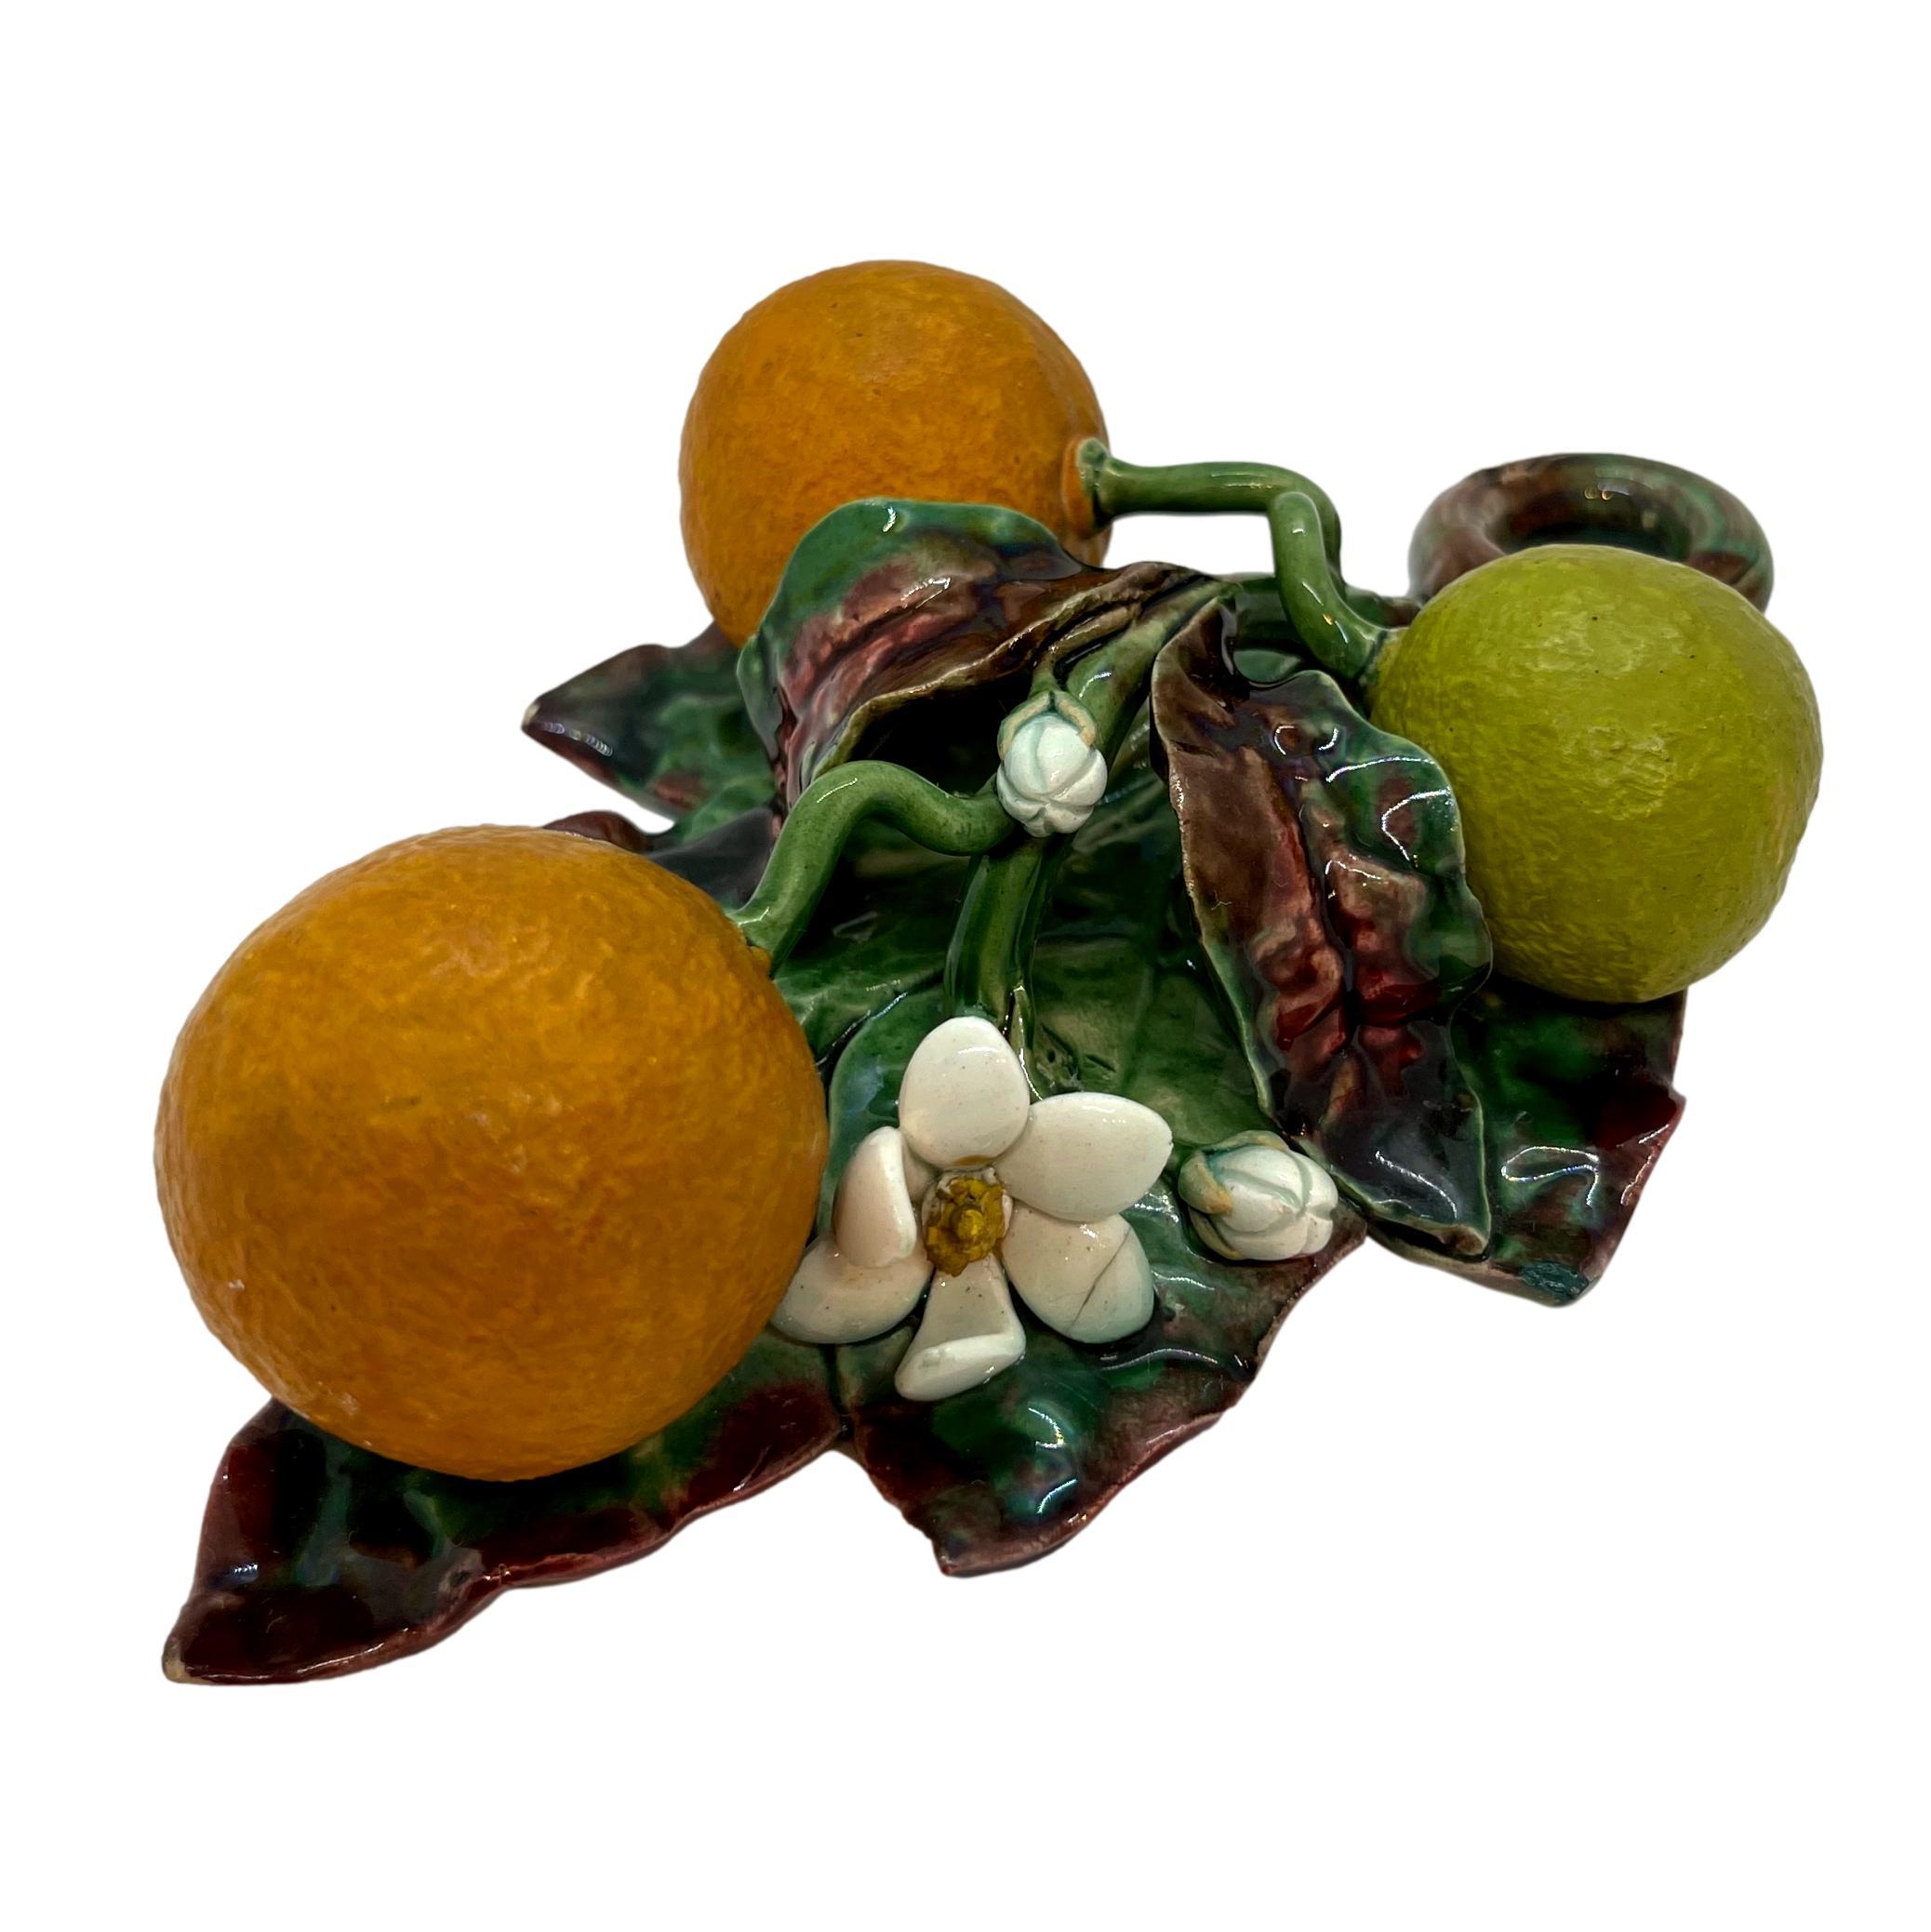 Menton French Majolica (Barbotine) Trompe L'oeil Wall Plaque with oranges molded in high relief, circa 1880.
 
Generally referred to as 